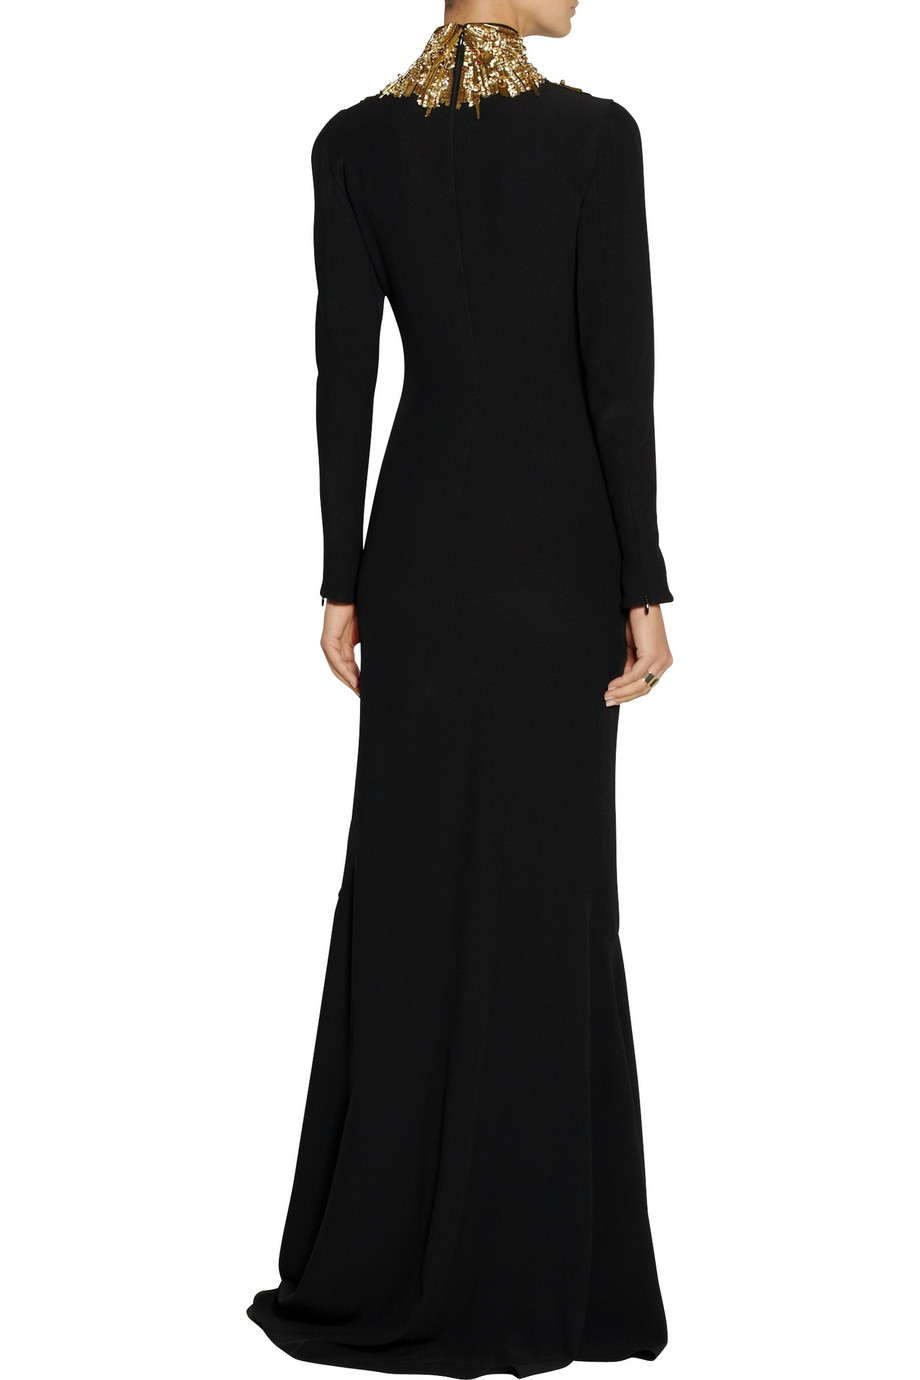 Alexander McQueen Embellished Cutout Crepe Gown in Black - Lyst